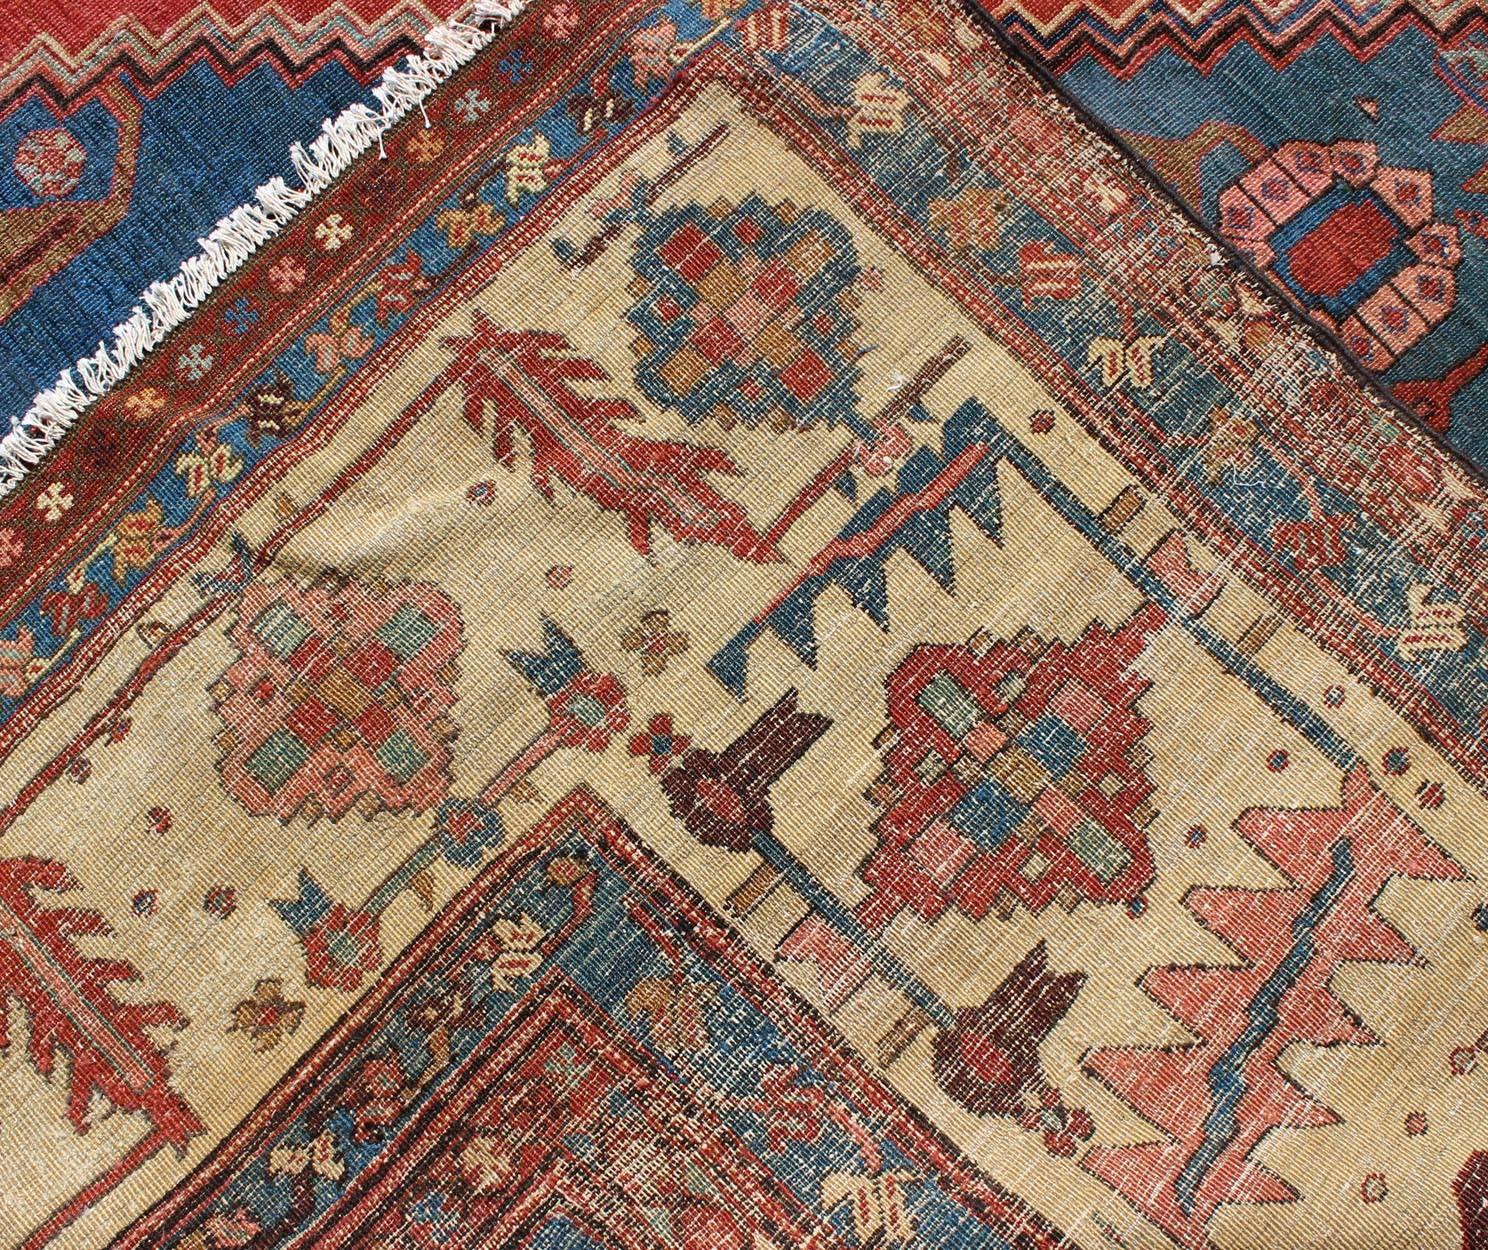 Antique Persian Large Bakshaish Serapi Rug in Brick Red, Royal Blue and Ivory For Sale 3